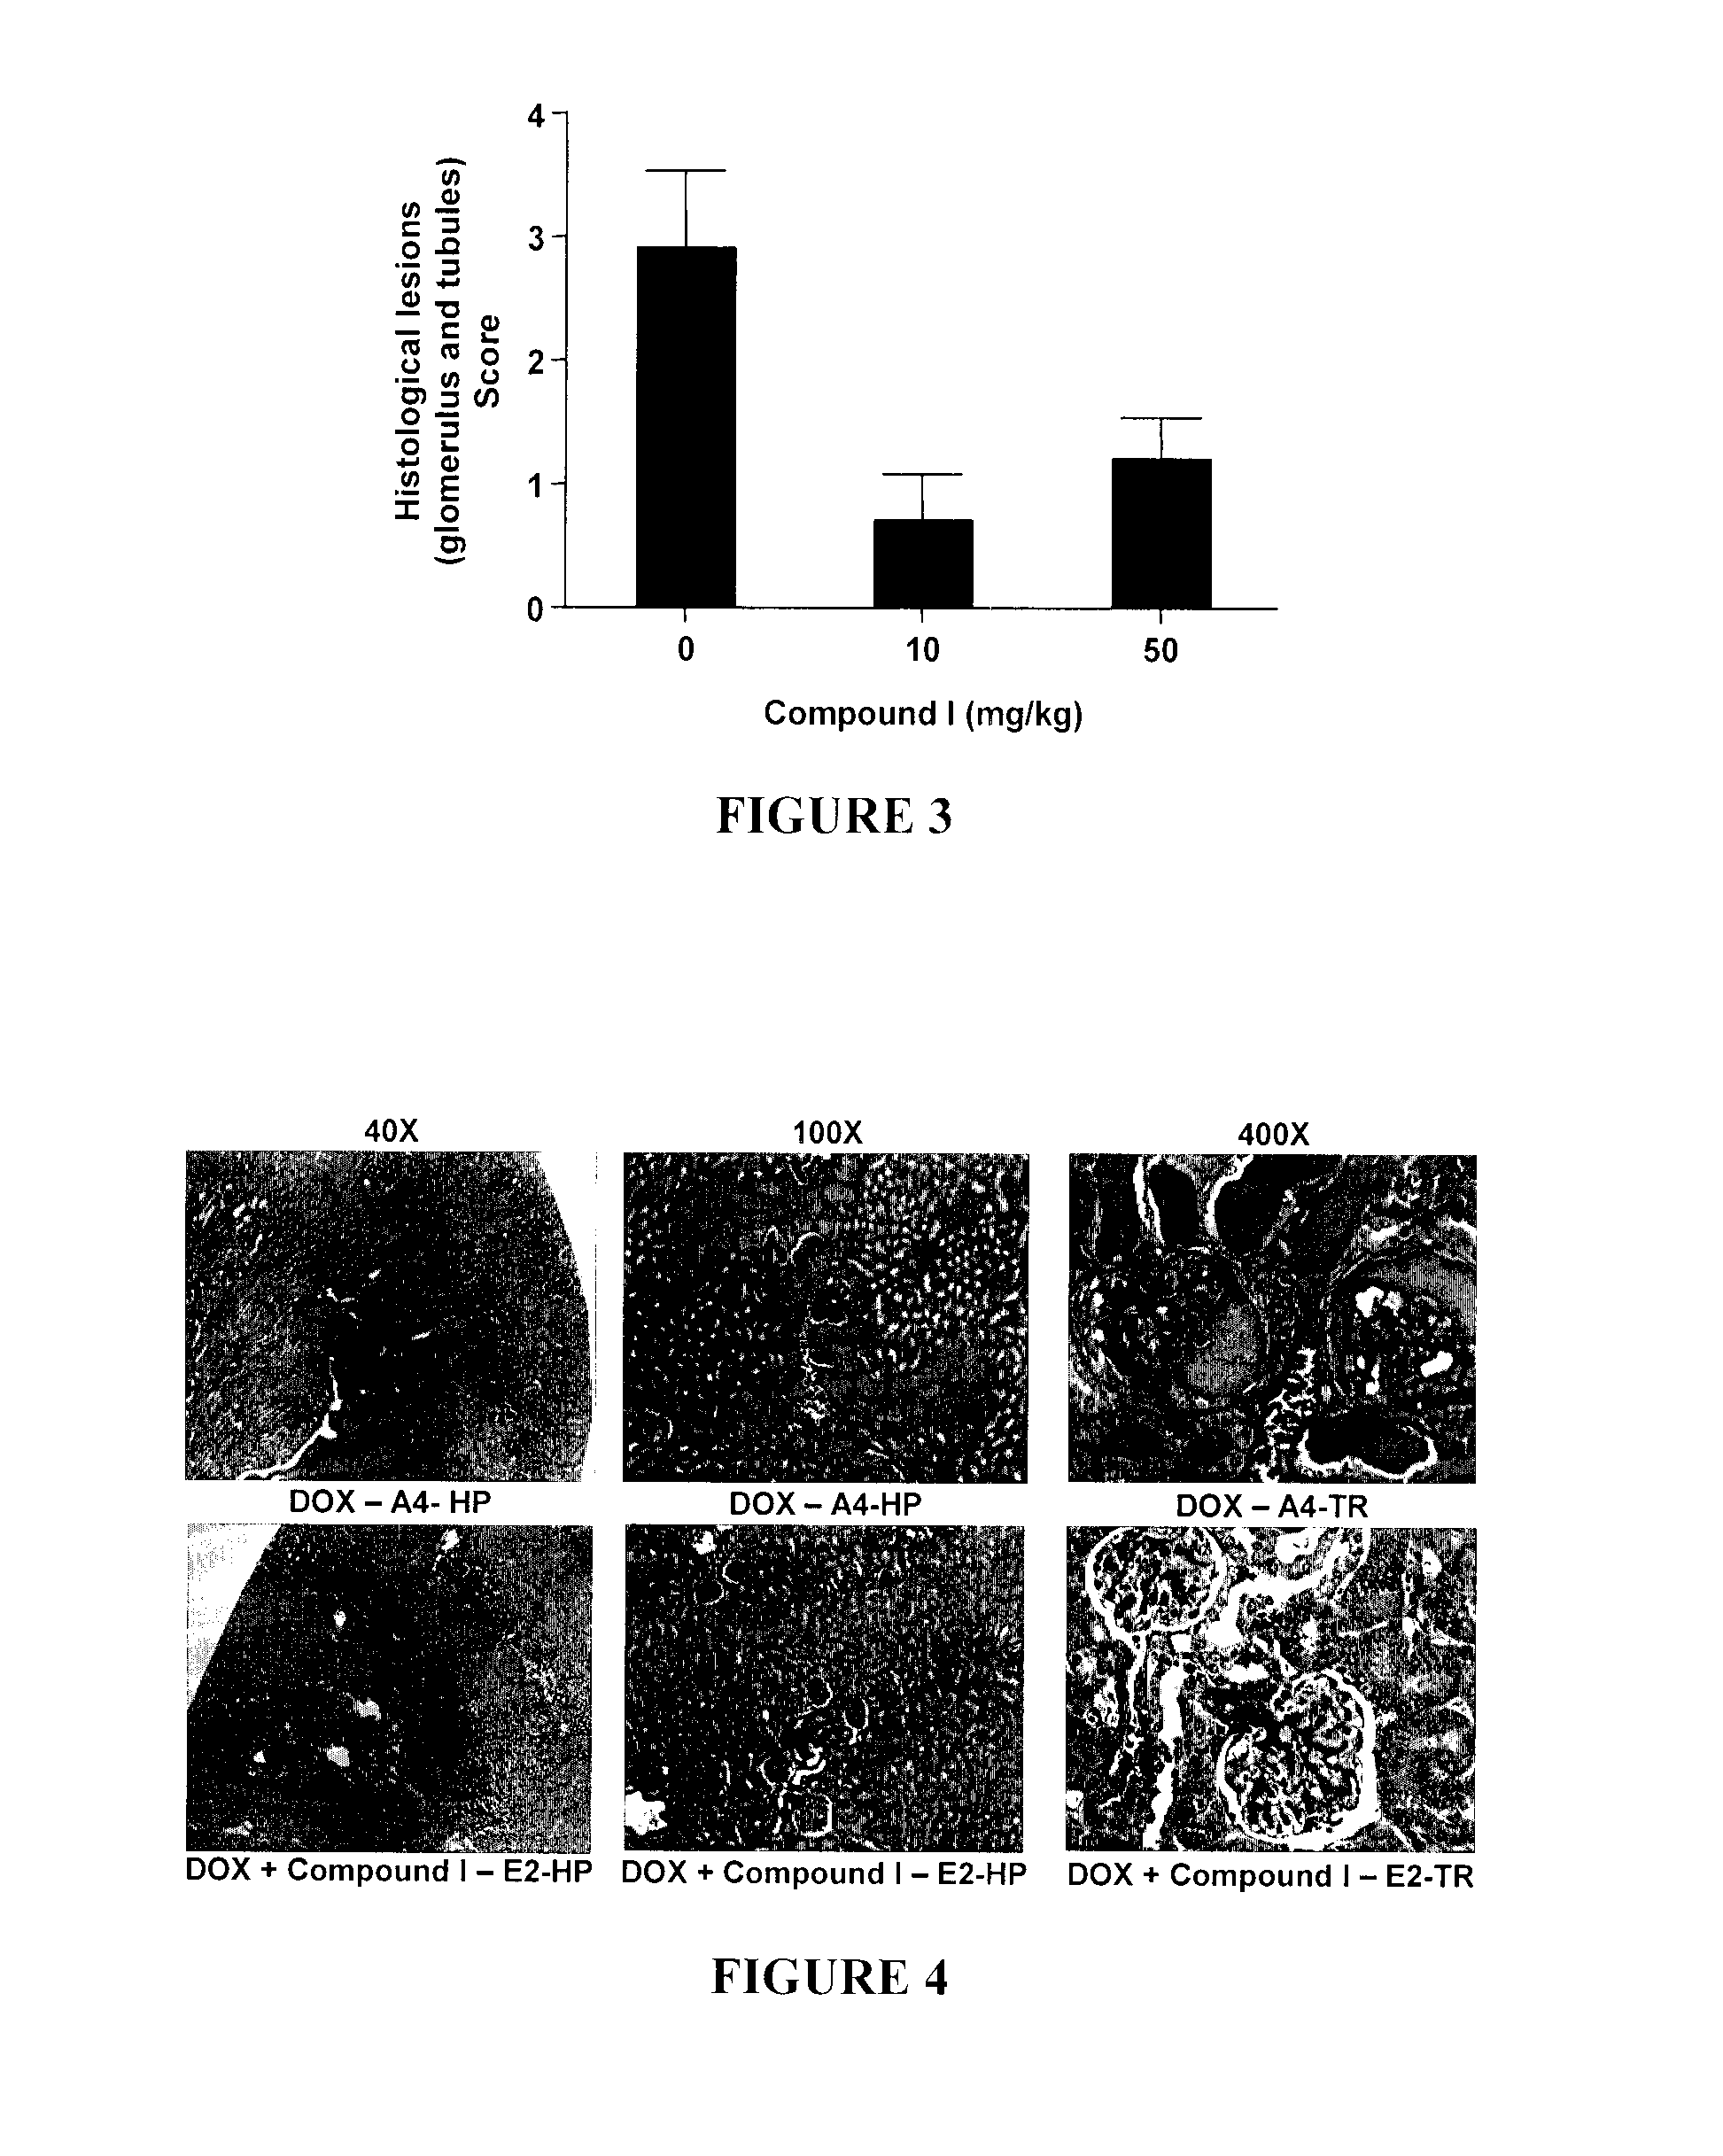 Phenylketone Carboxylate Compounds and Pharmaceutical Uses Thereof